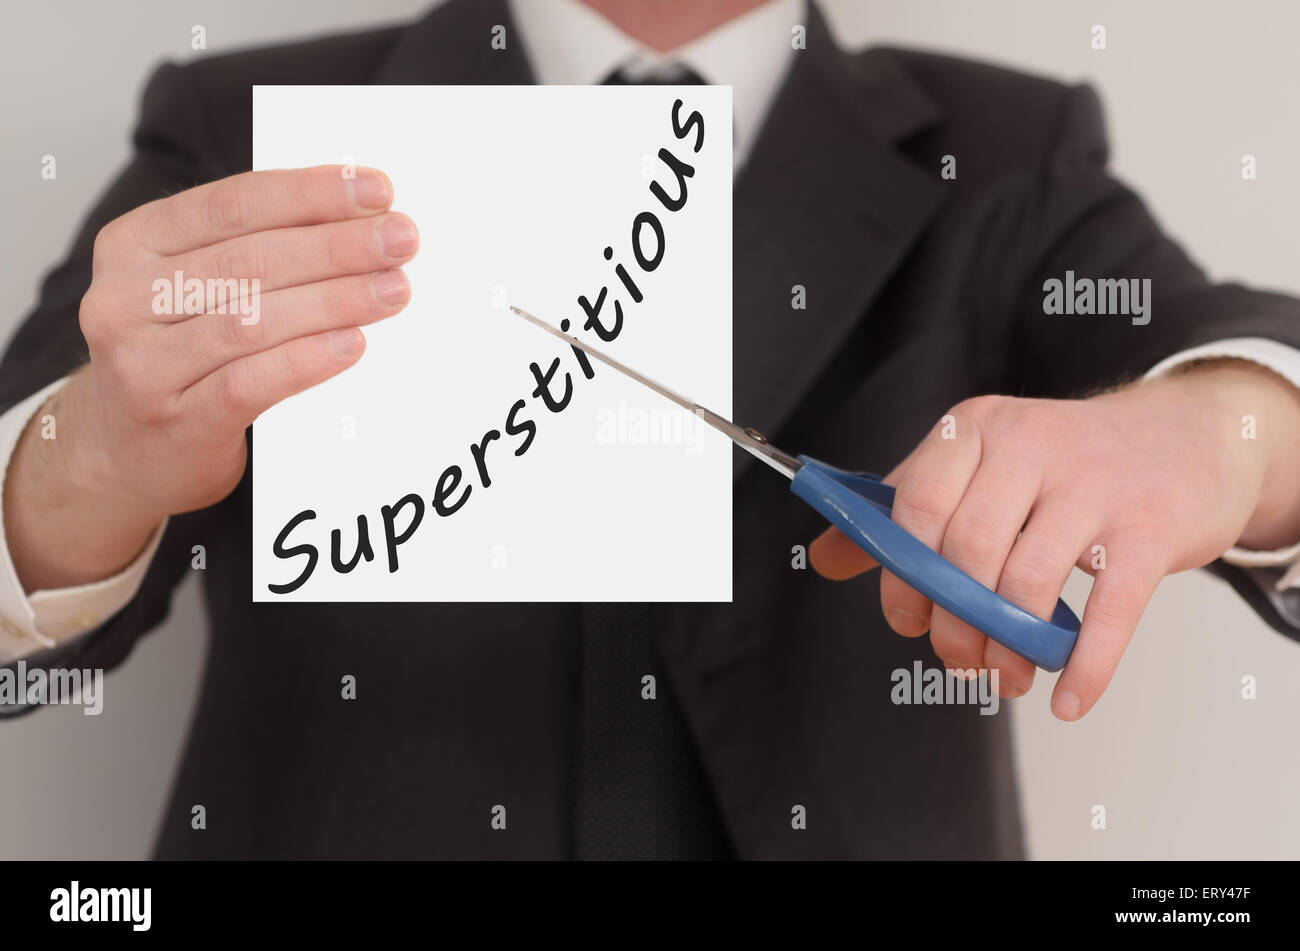 Superstitious, man in suit cutting text on paper with scissors Stock Photo